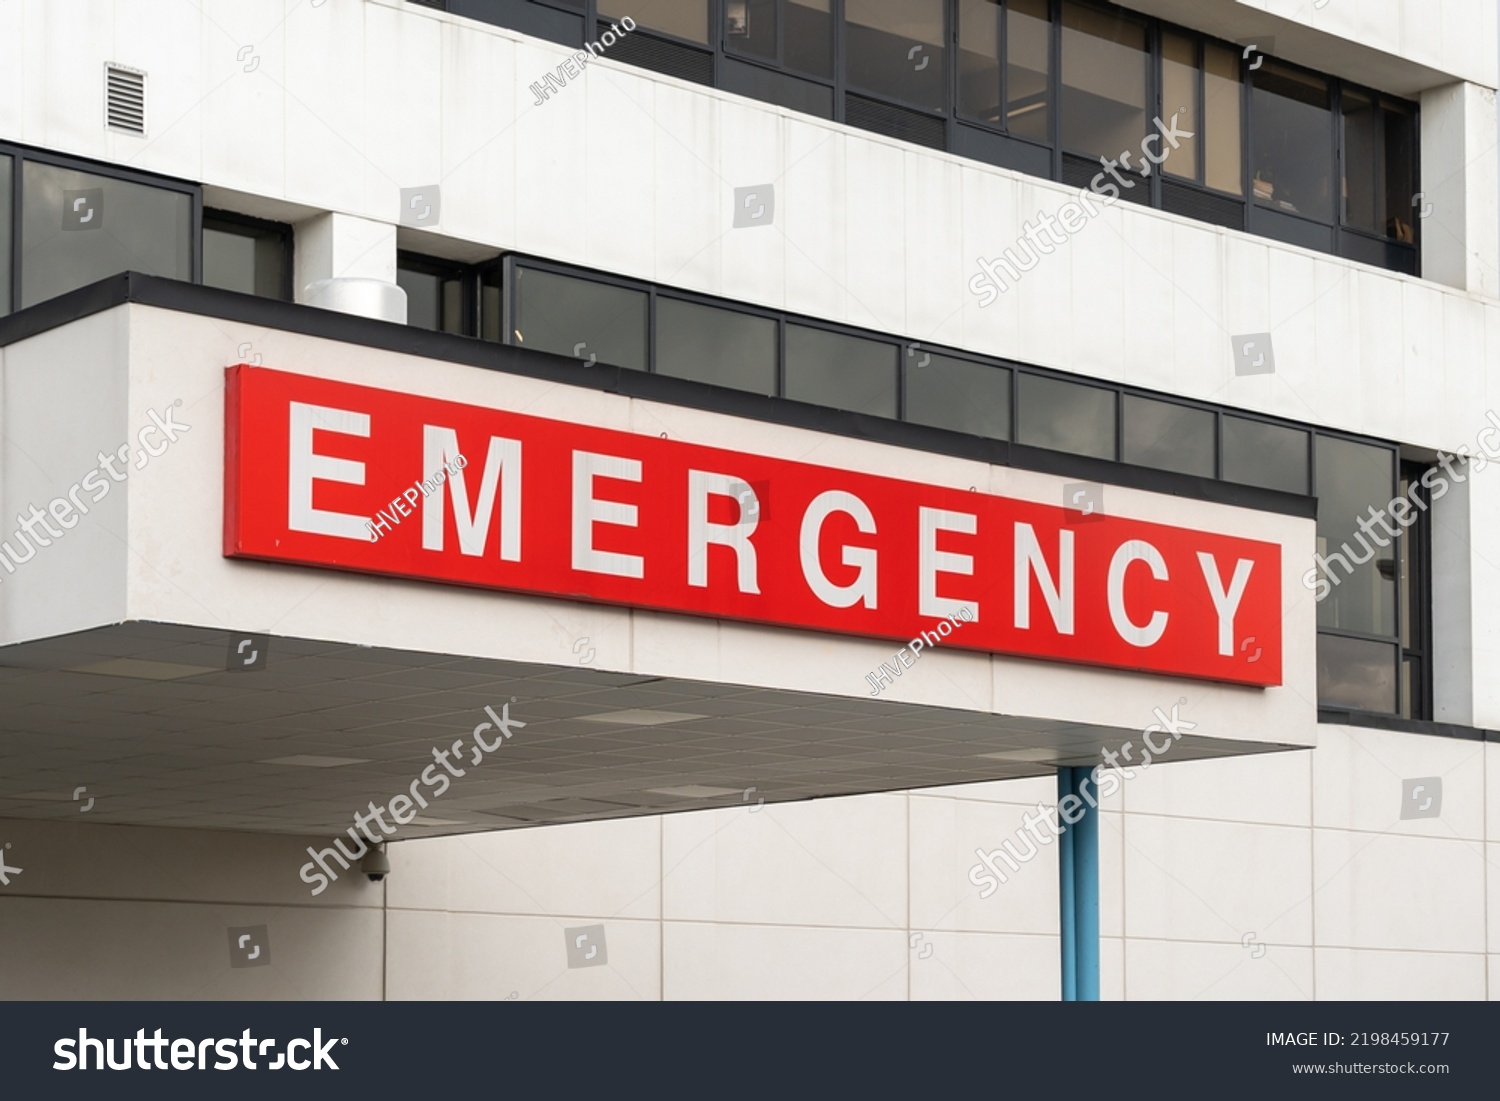 Emergency sign above the entrance at a hospital in the United States.   #2198459177